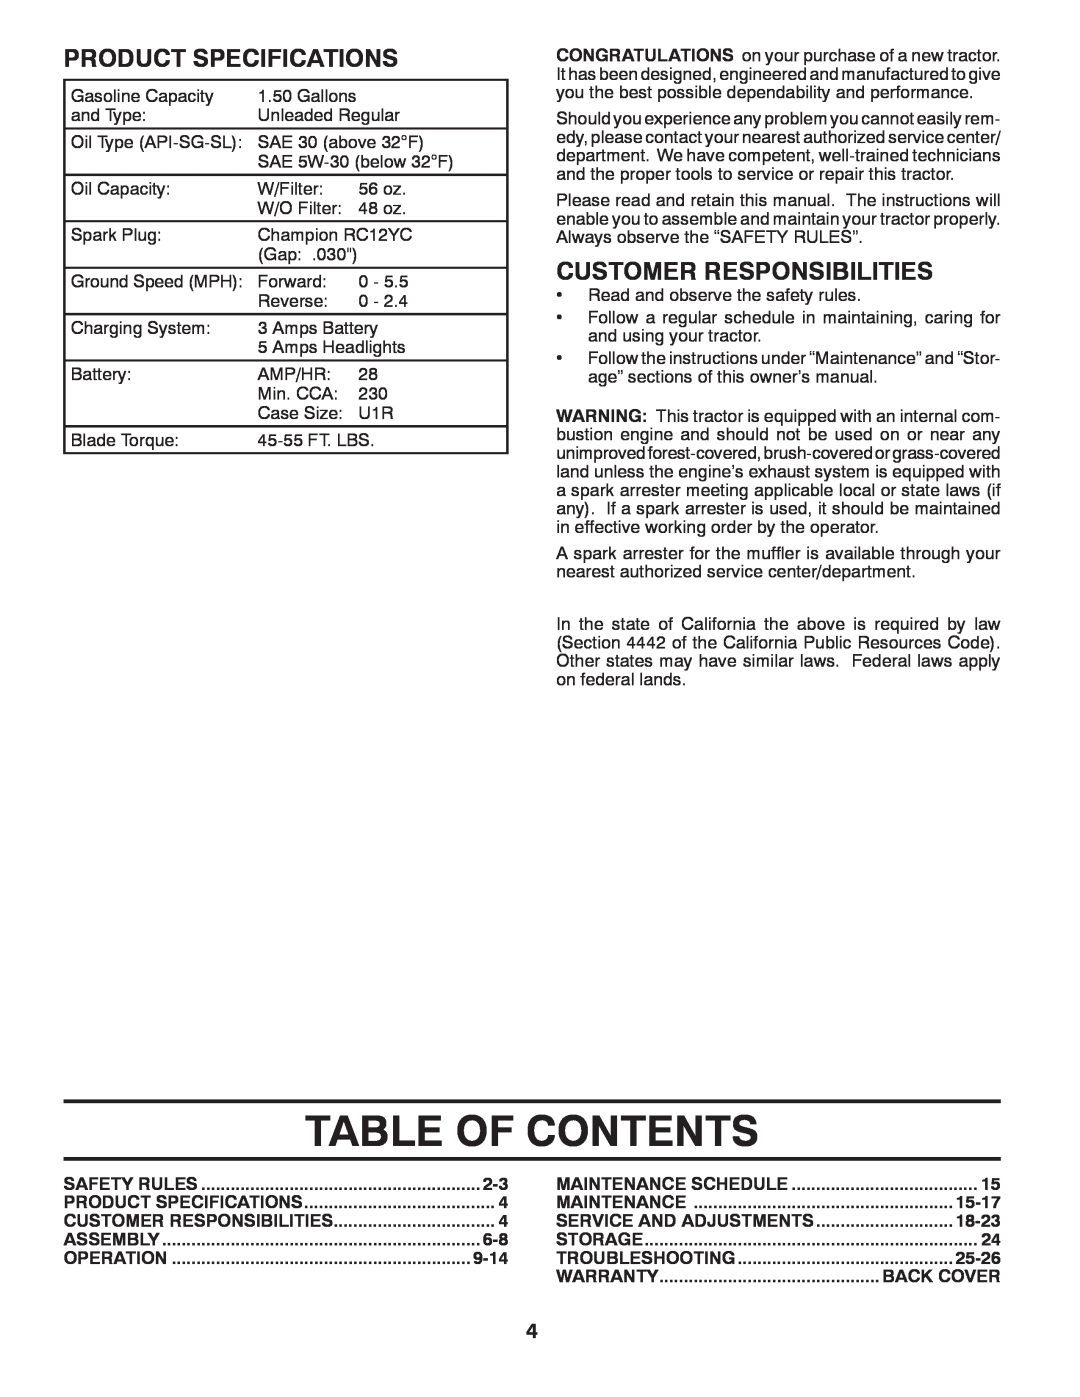 Poulan 96042007200, 419756 Table Of Contents, Product Specifications, Customer Responsibilities, 9-14, 15-17, 18-23, 25-26 